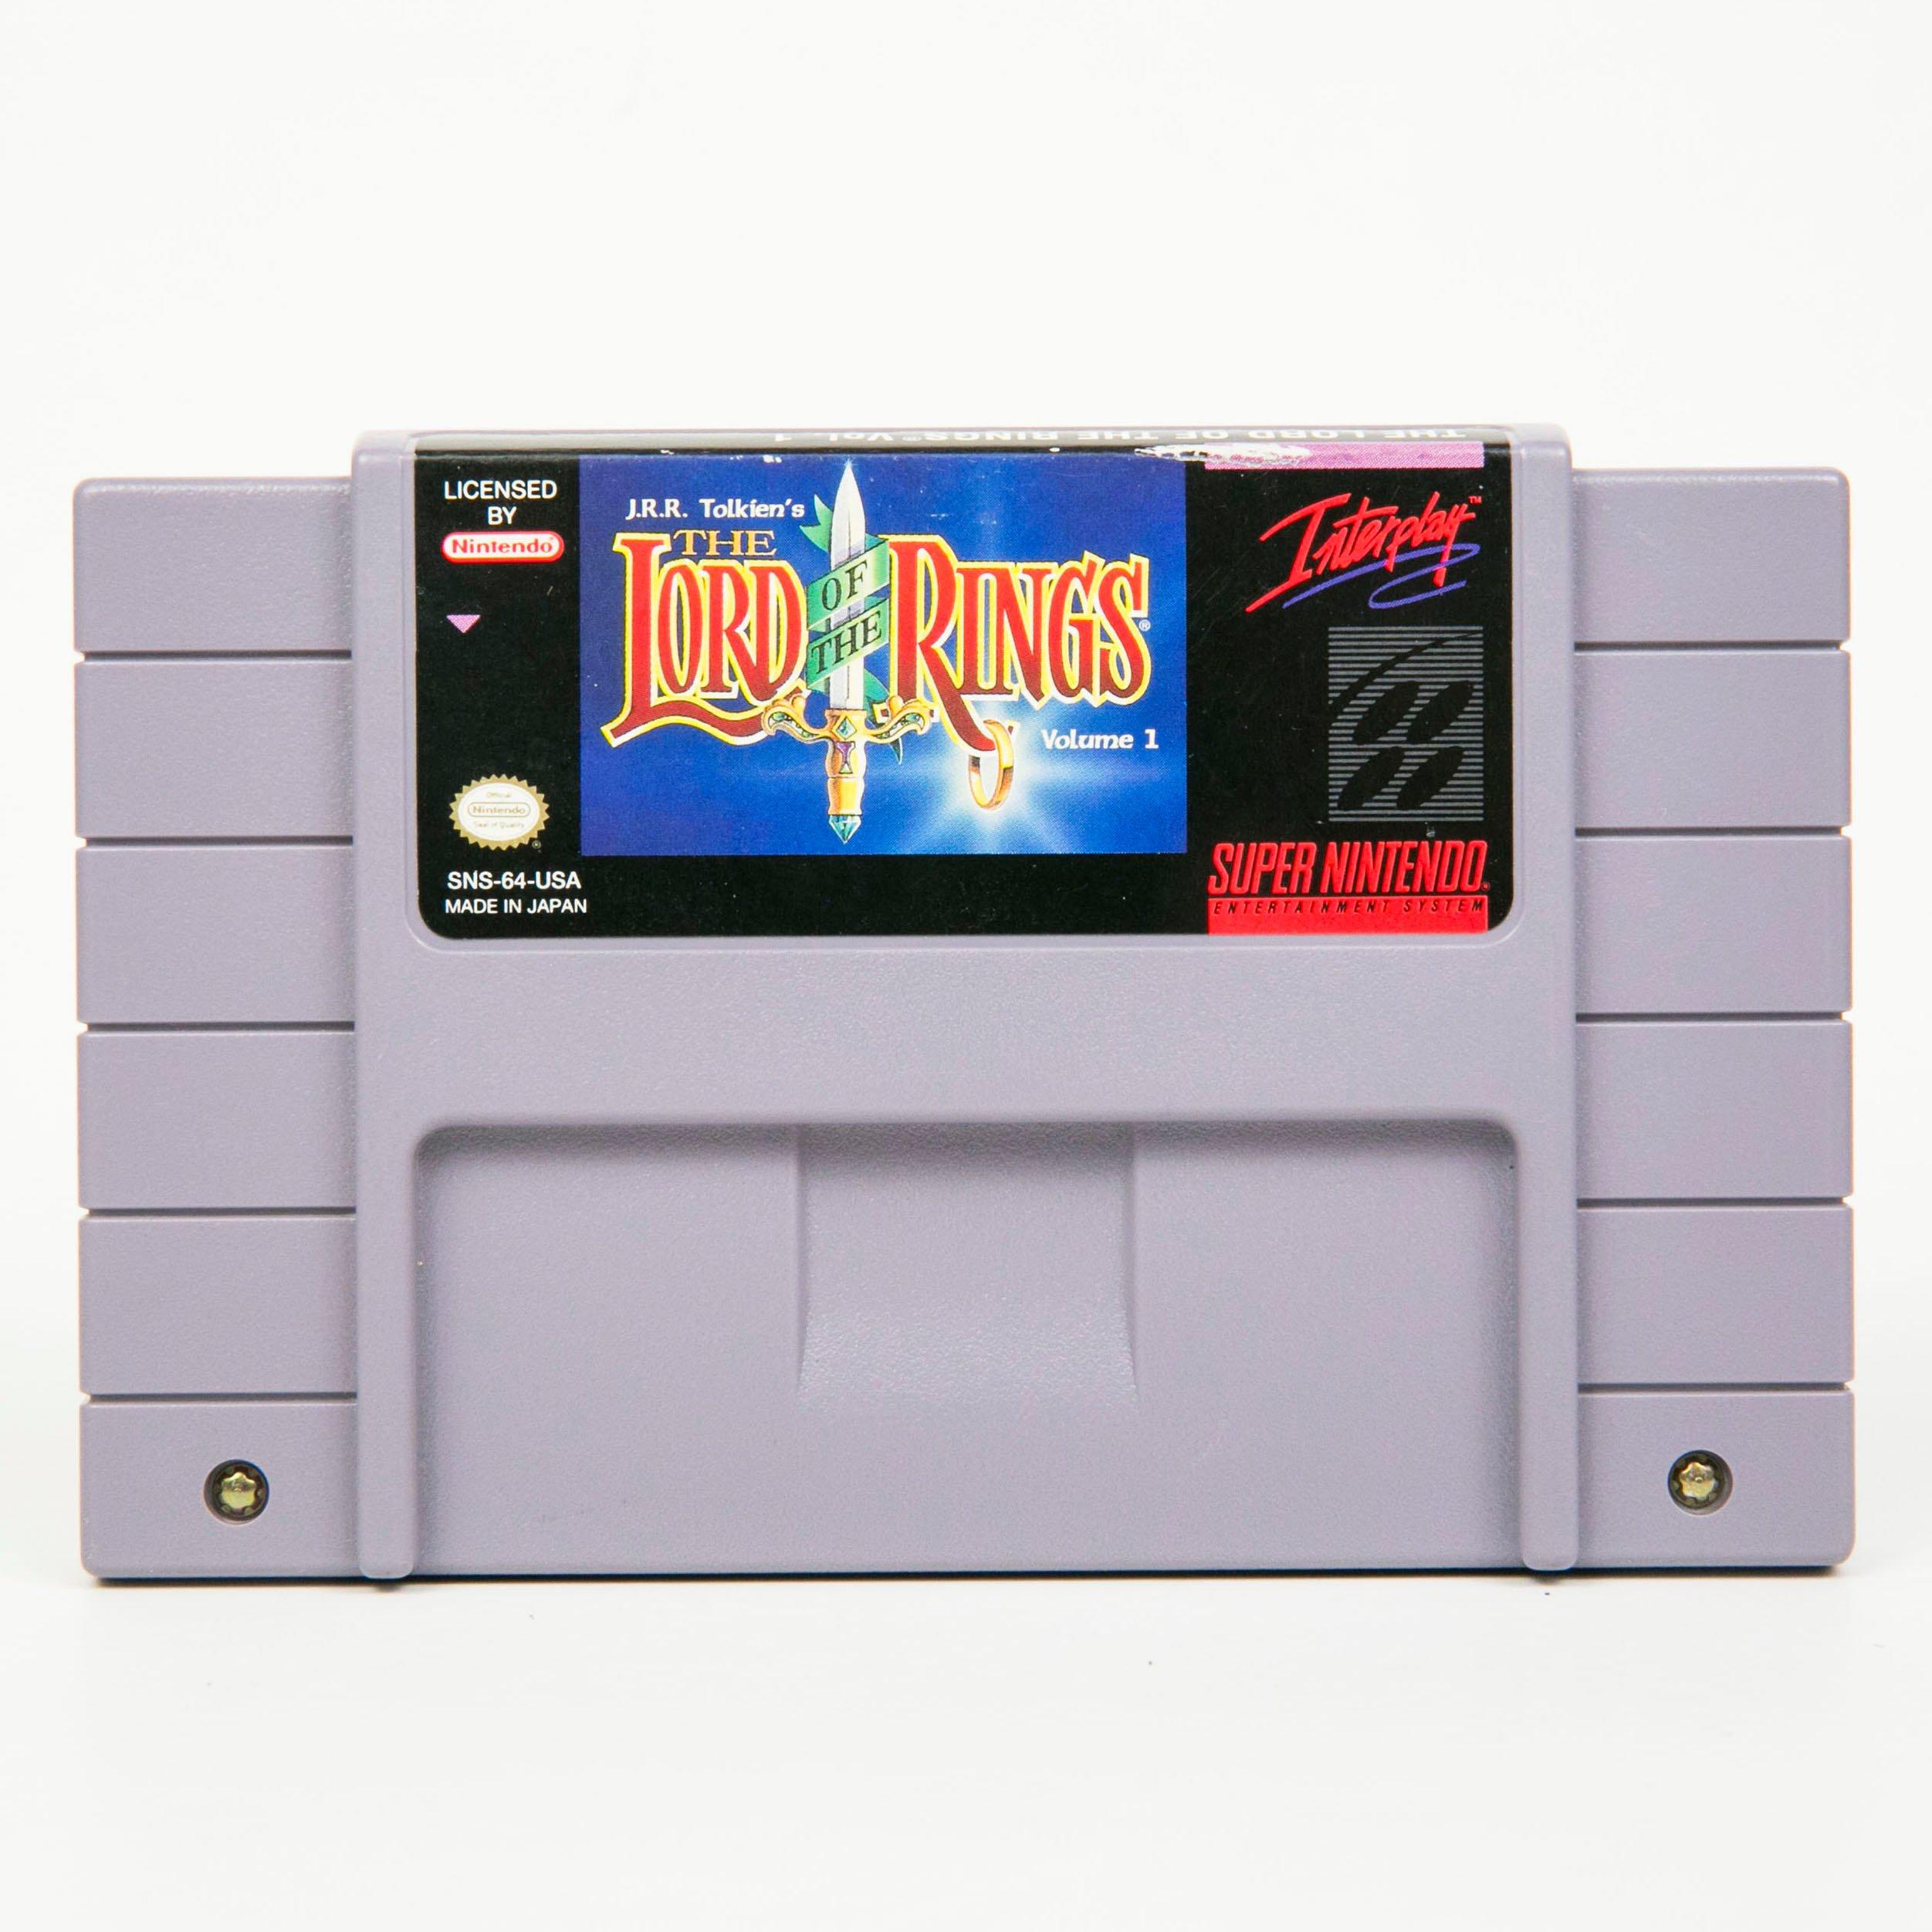 J.R.R. Tolkien's The Lord of the Rings: Volume 1 - Super Nintendo